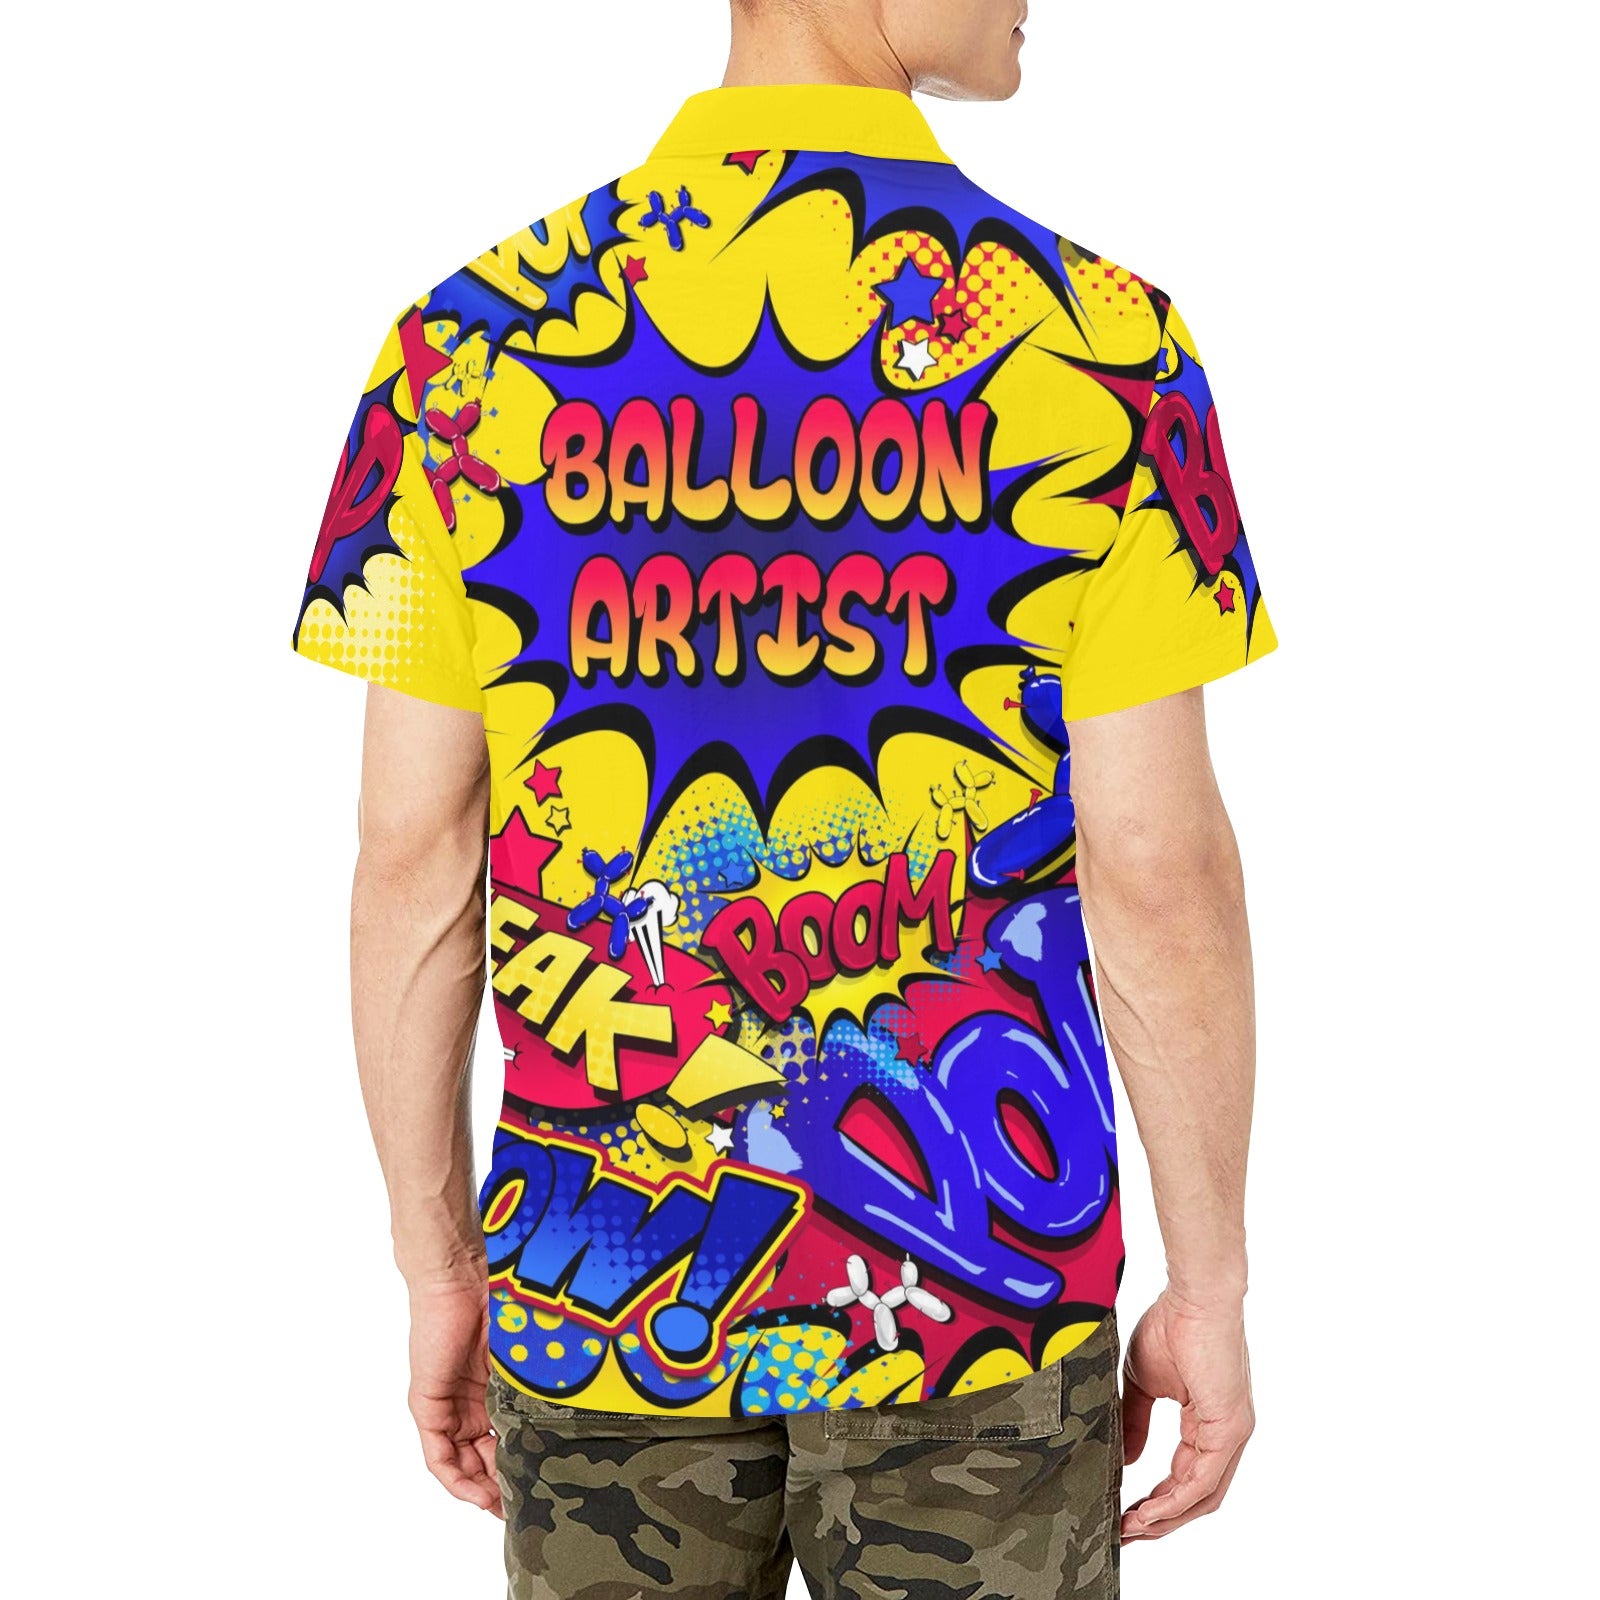 Comic Book Party Shirt for Balloon Artists